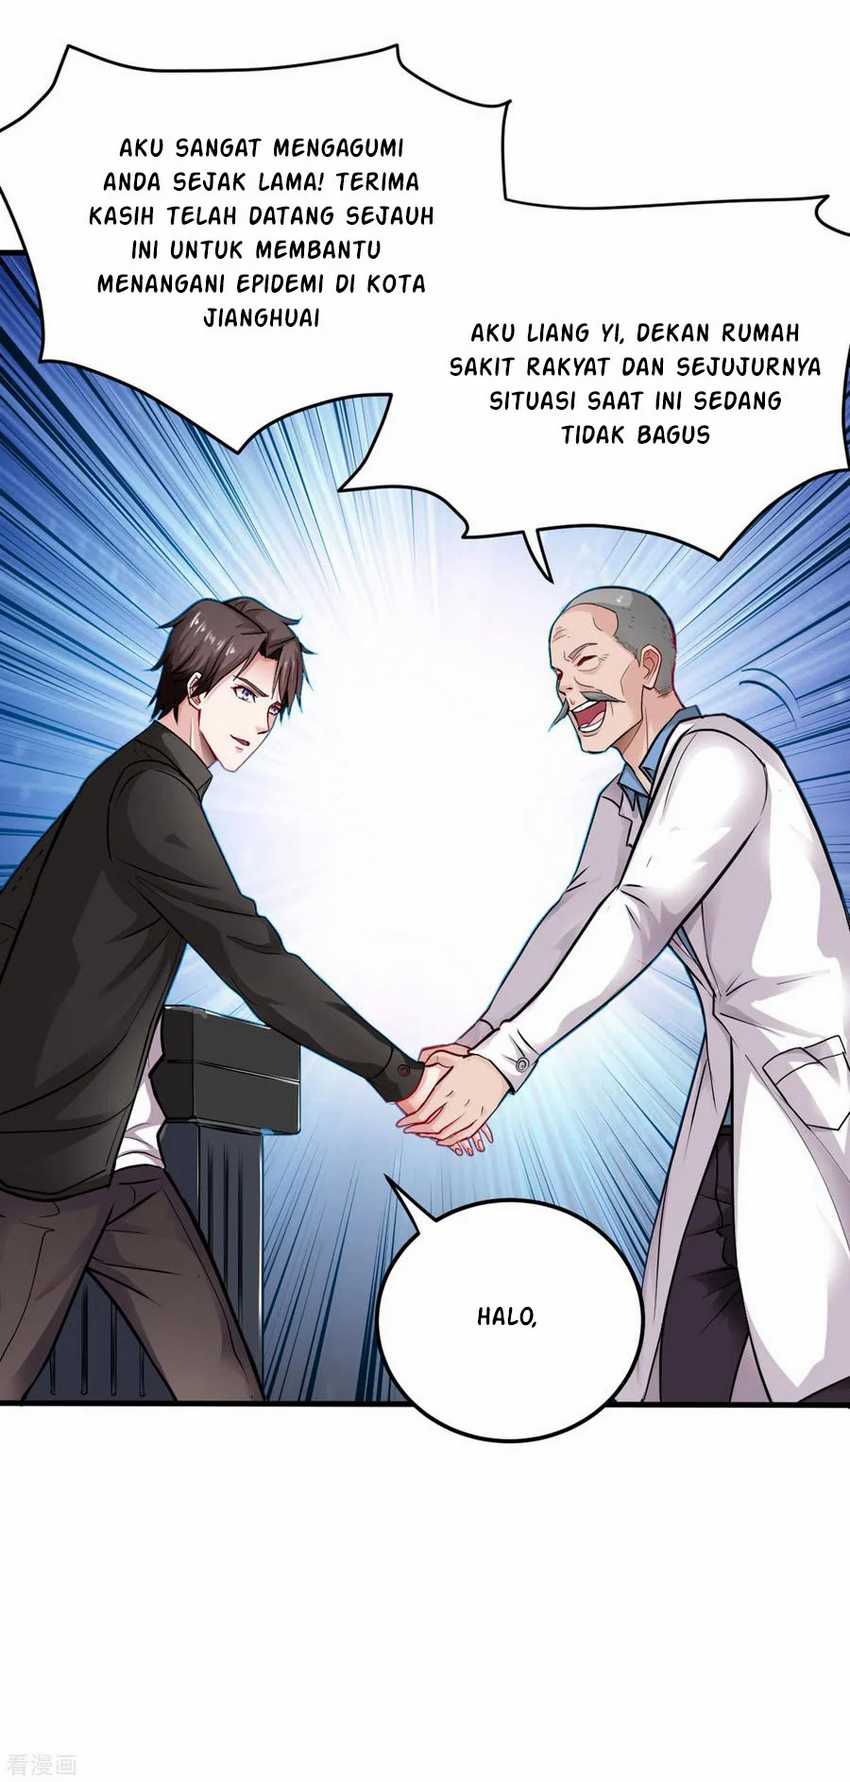 Strongest Divine Doctor Mixed City Chapter 127